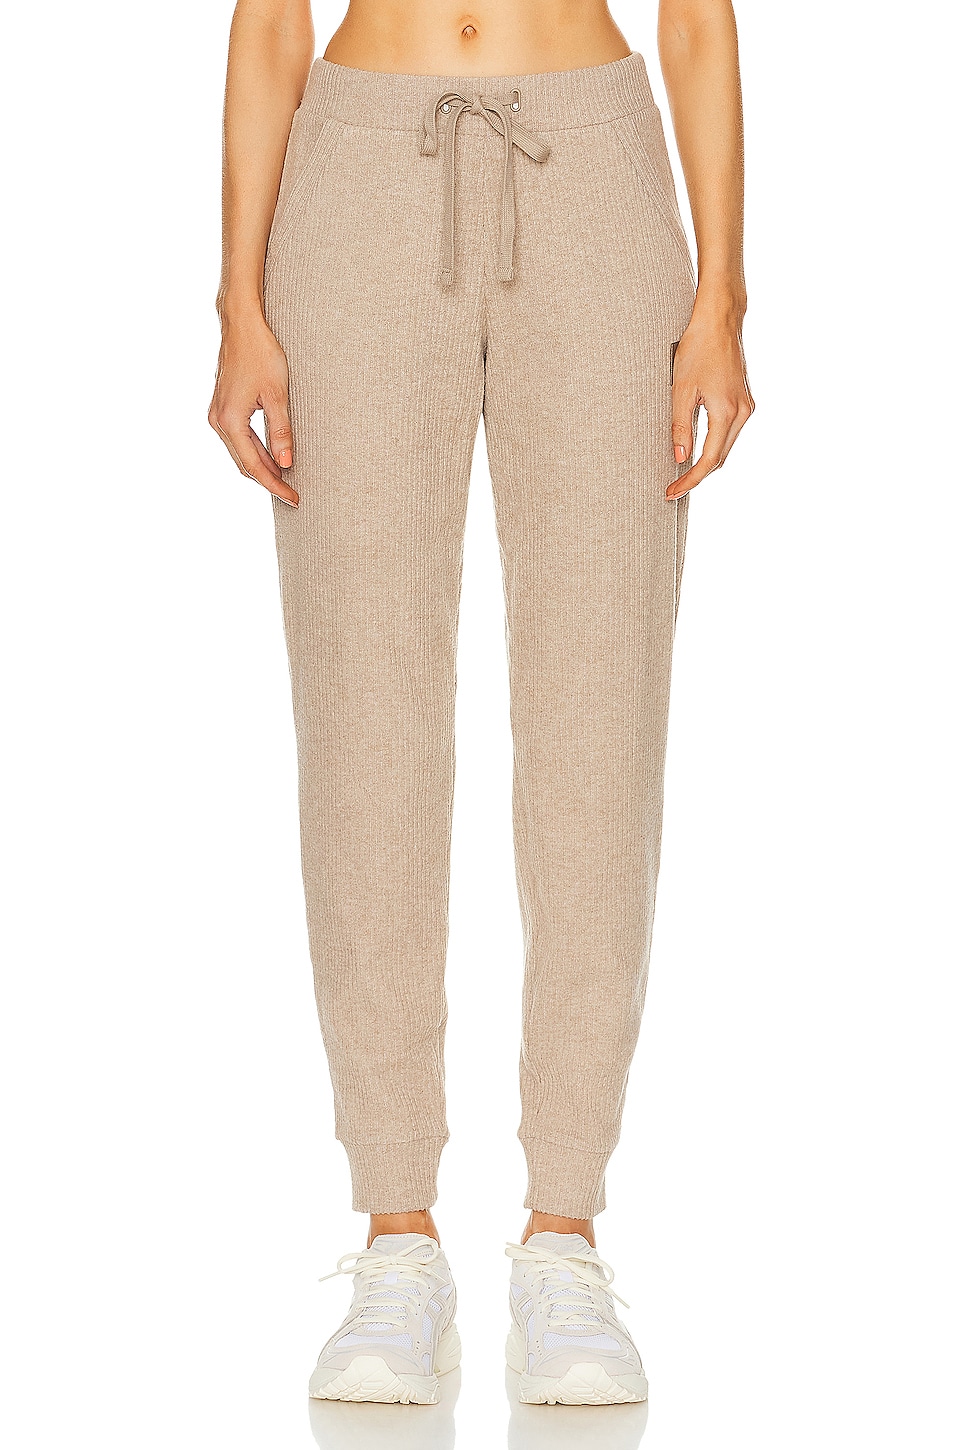 Image 1 of alo Muse Sweatpant in Gravel Heather